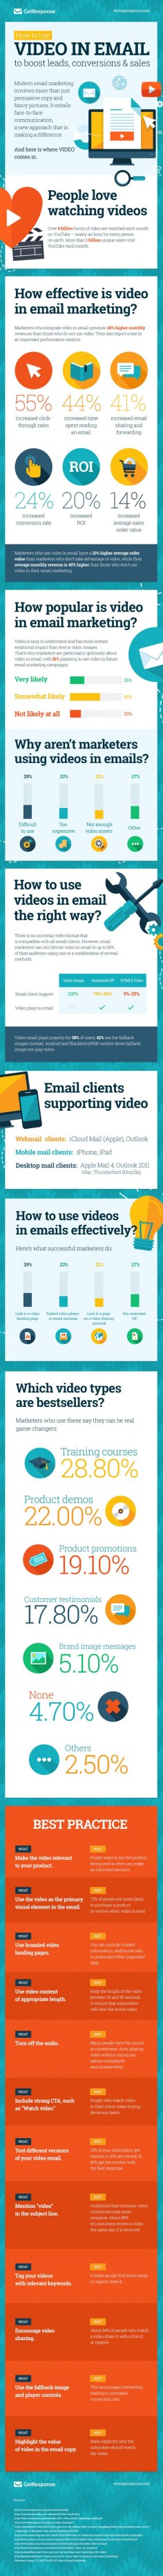 Video in Email Here is What You Need to Know #infographic